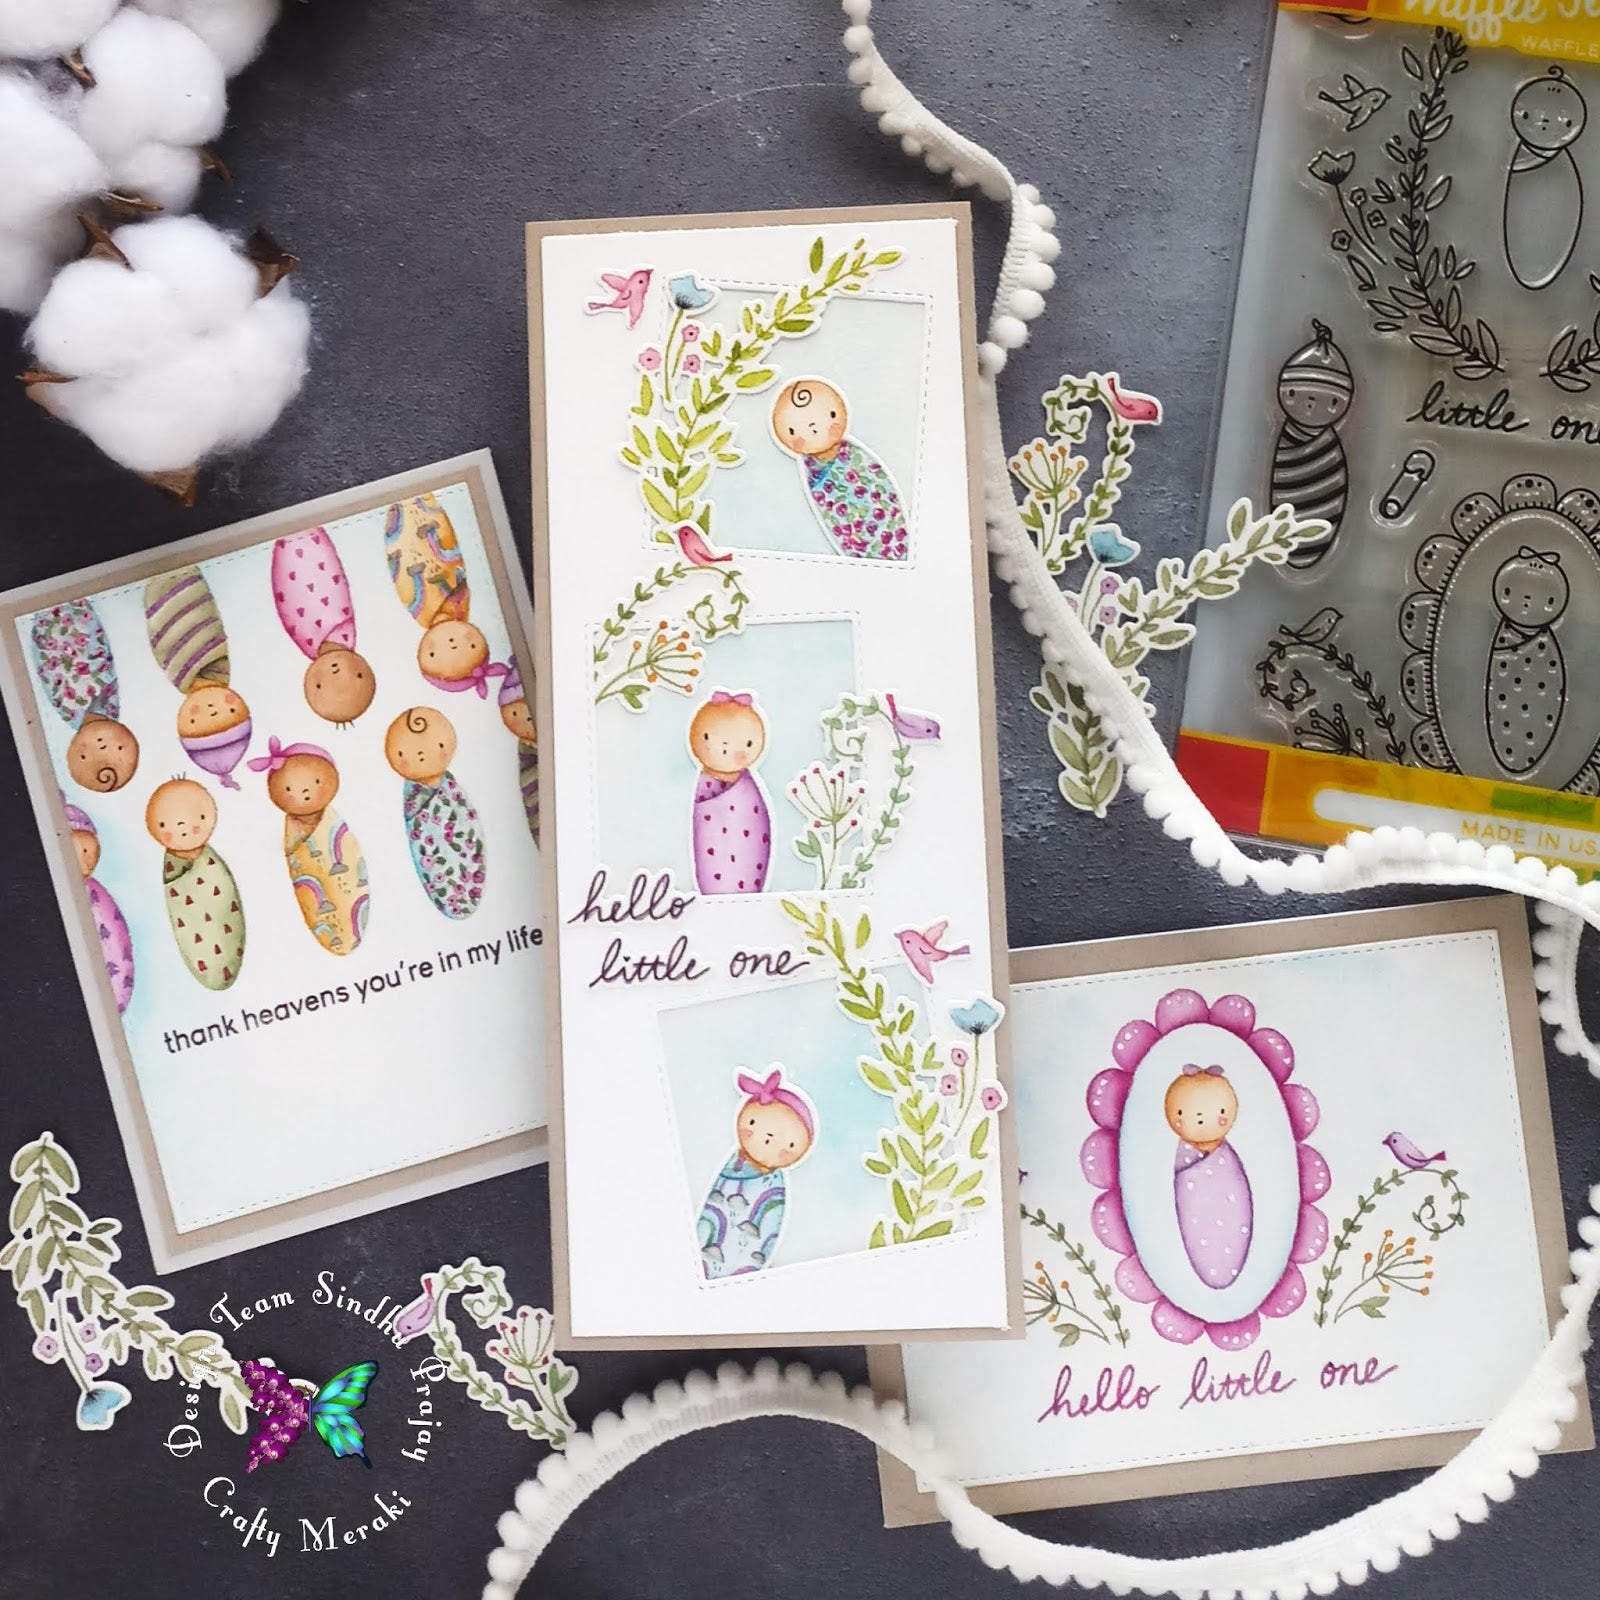 Ooh BABY! 3 ADORABLE baby cards with Sindhu